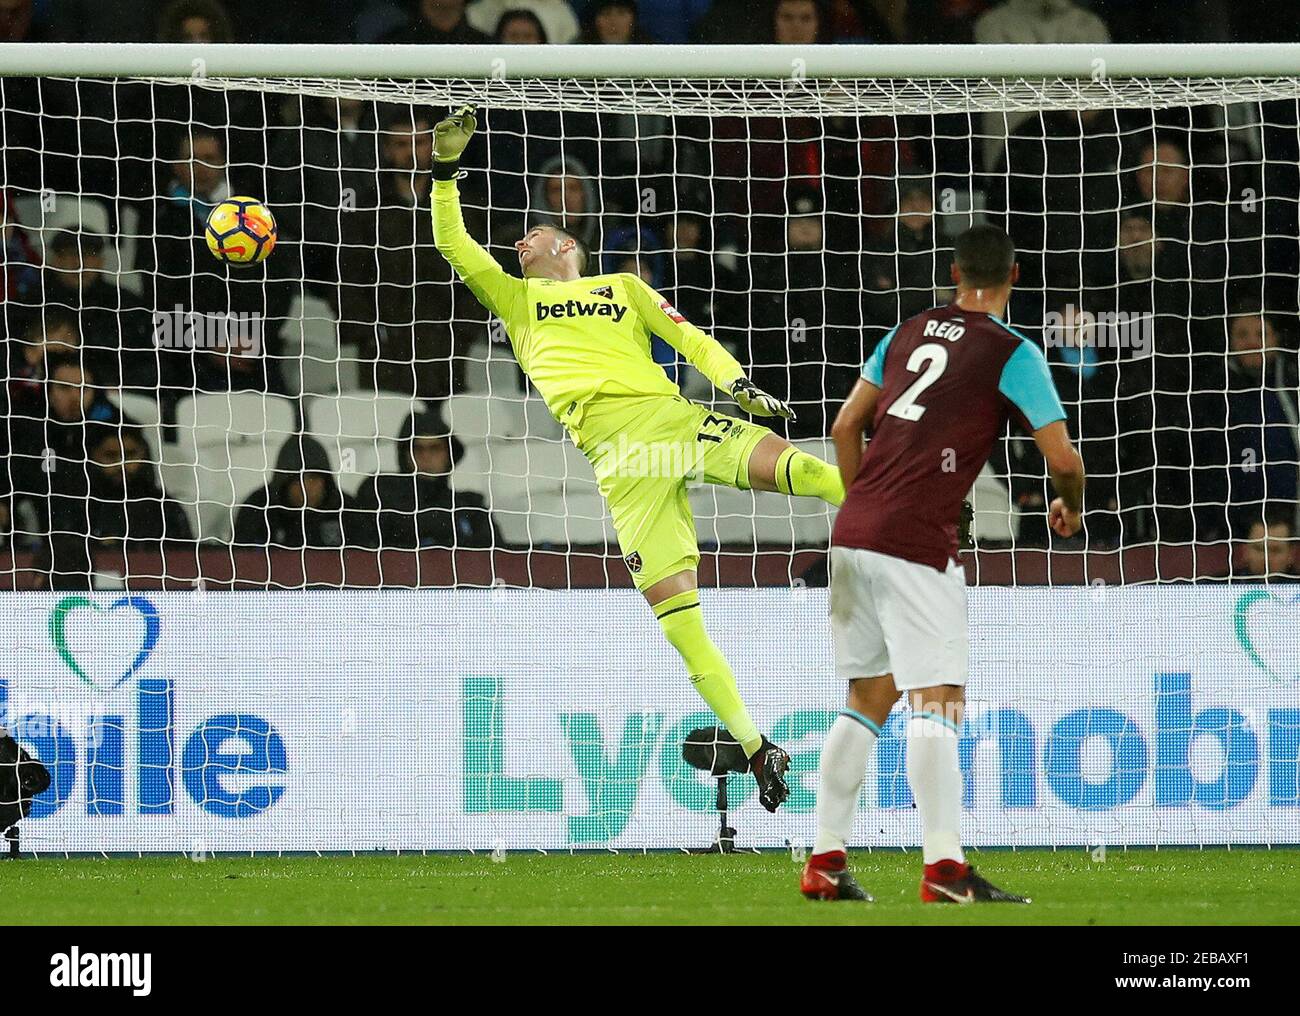 Soccer Football - Premier League - West Ham United vs West Bromwich Albion - London Stadium, London, Britain - January 2, 2018   West Bromwich Albion's James McClean scores their first goal past West Ham United's Adrian   REUTERS/Eddie Keogh    EDITORIAL USE ONLY. No use with unauthorized audio, video, data, fixture lists, club/league logos or 'live' services. Online in-match use limited to 75 images, no video emulation. No use in betting, games or single club/league/player publications.  Please contact your account representative for further details. Stock Photo